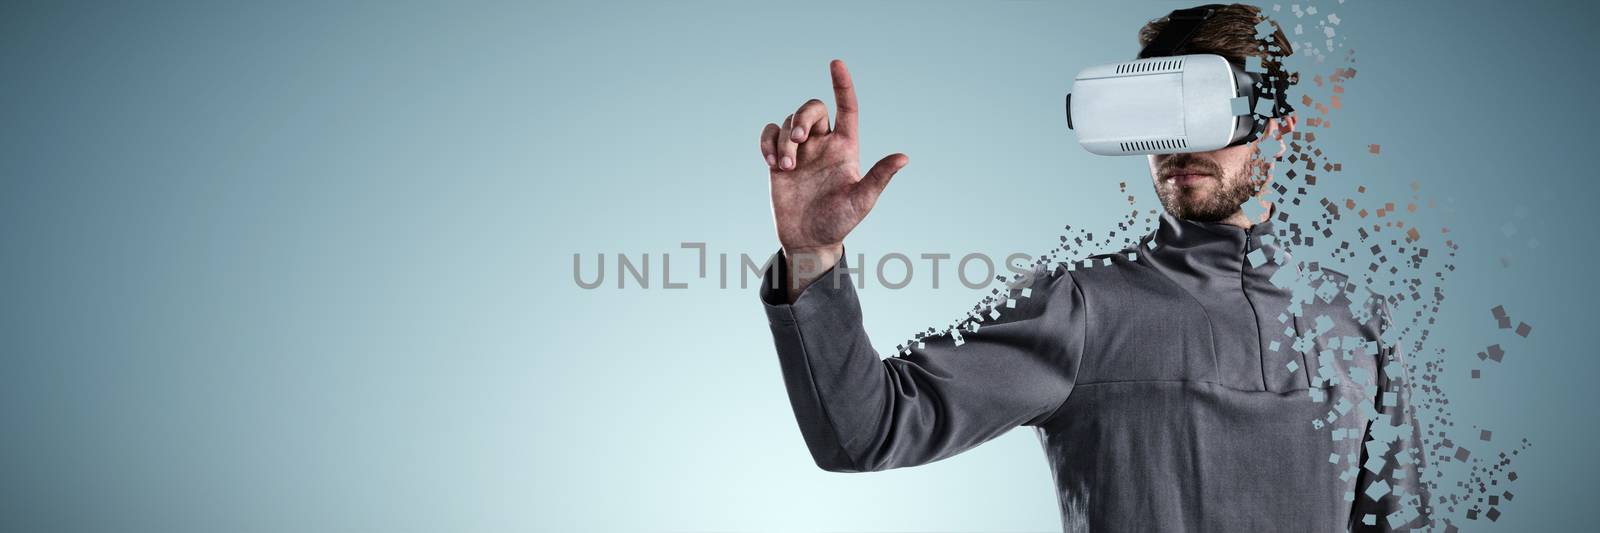 Man gesturing while using virtual reality headset against abstract grey background